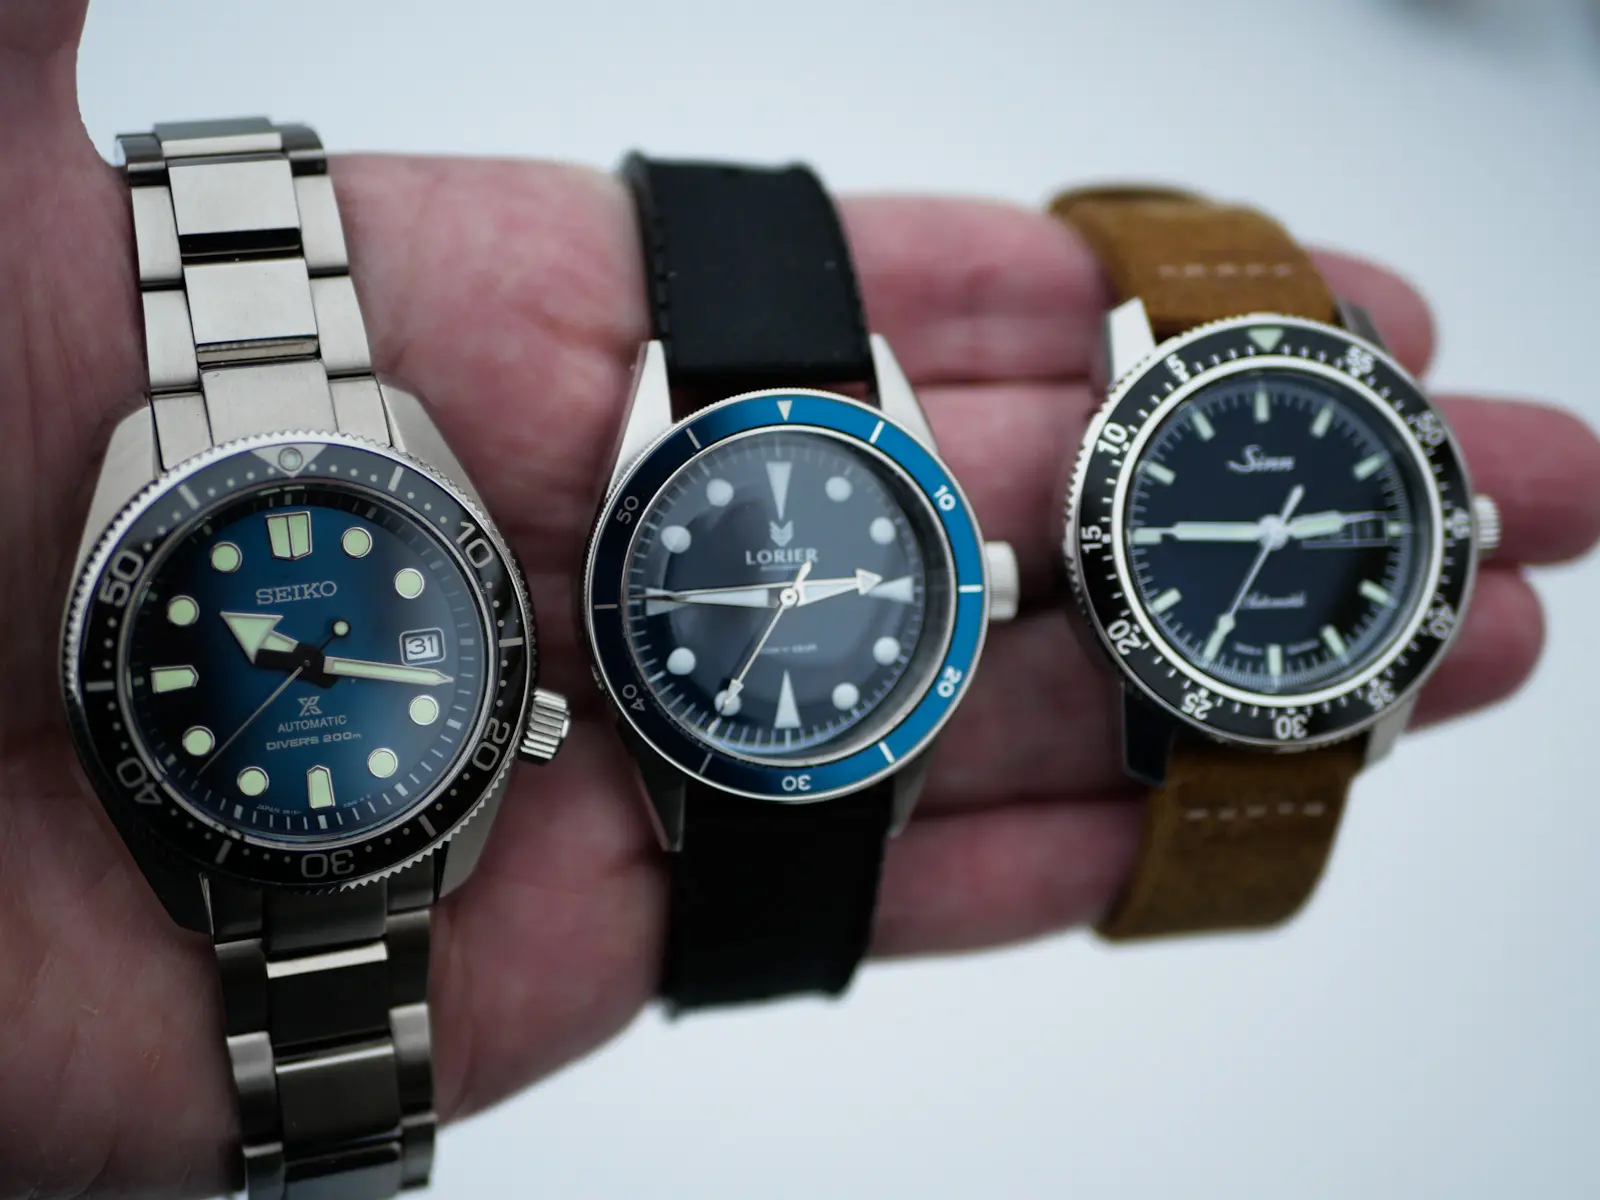 The watches I wore the most in 2020: The Seiko Prospex SPB083J1, Sinn 104  and Lorier Neptune - Time and Tide Watches